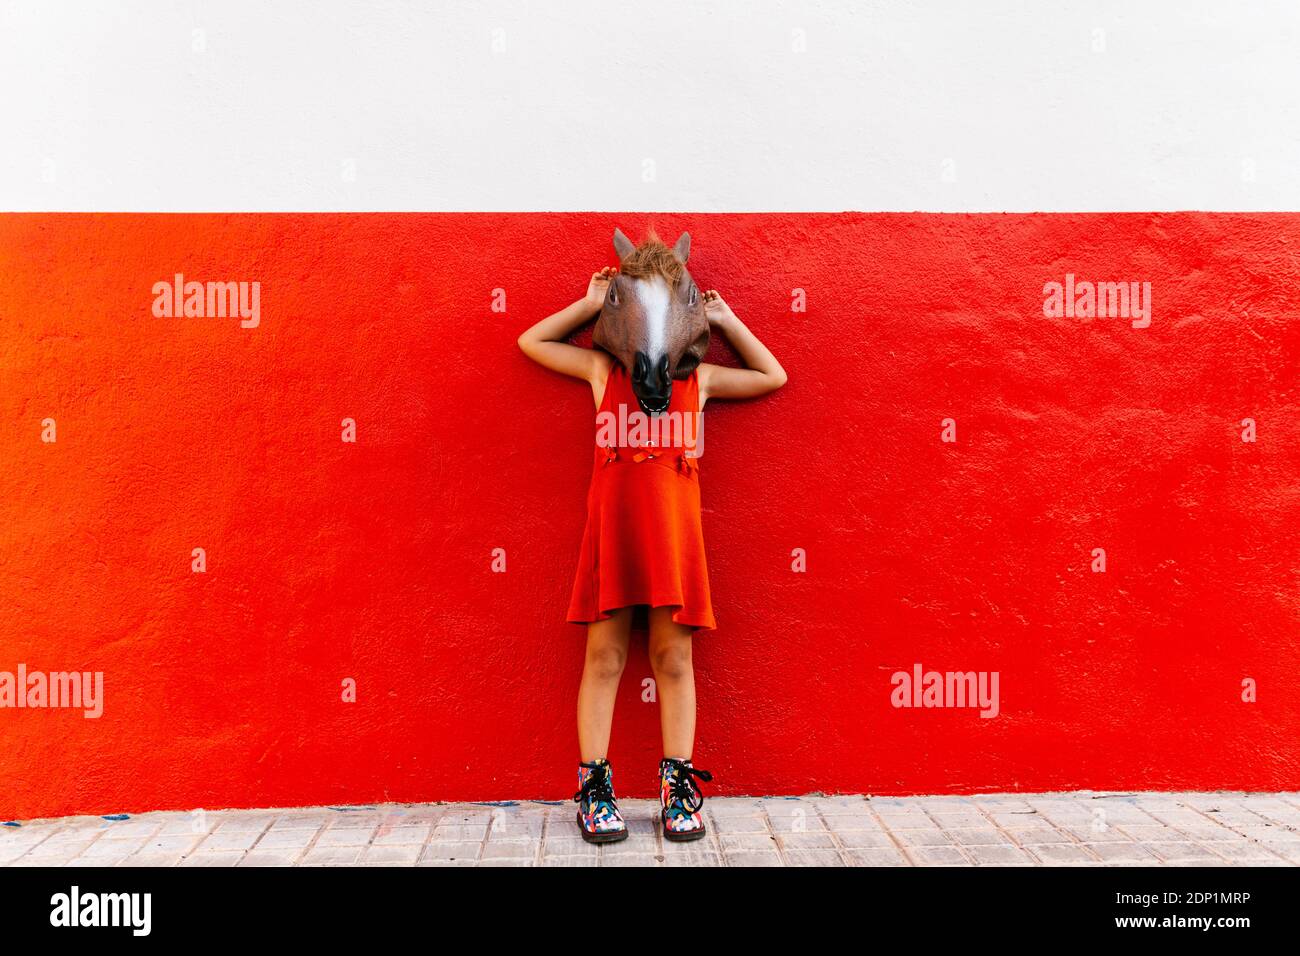 Little girl with a horse's head and a red dress Lening on a red and white wall Stock Photo